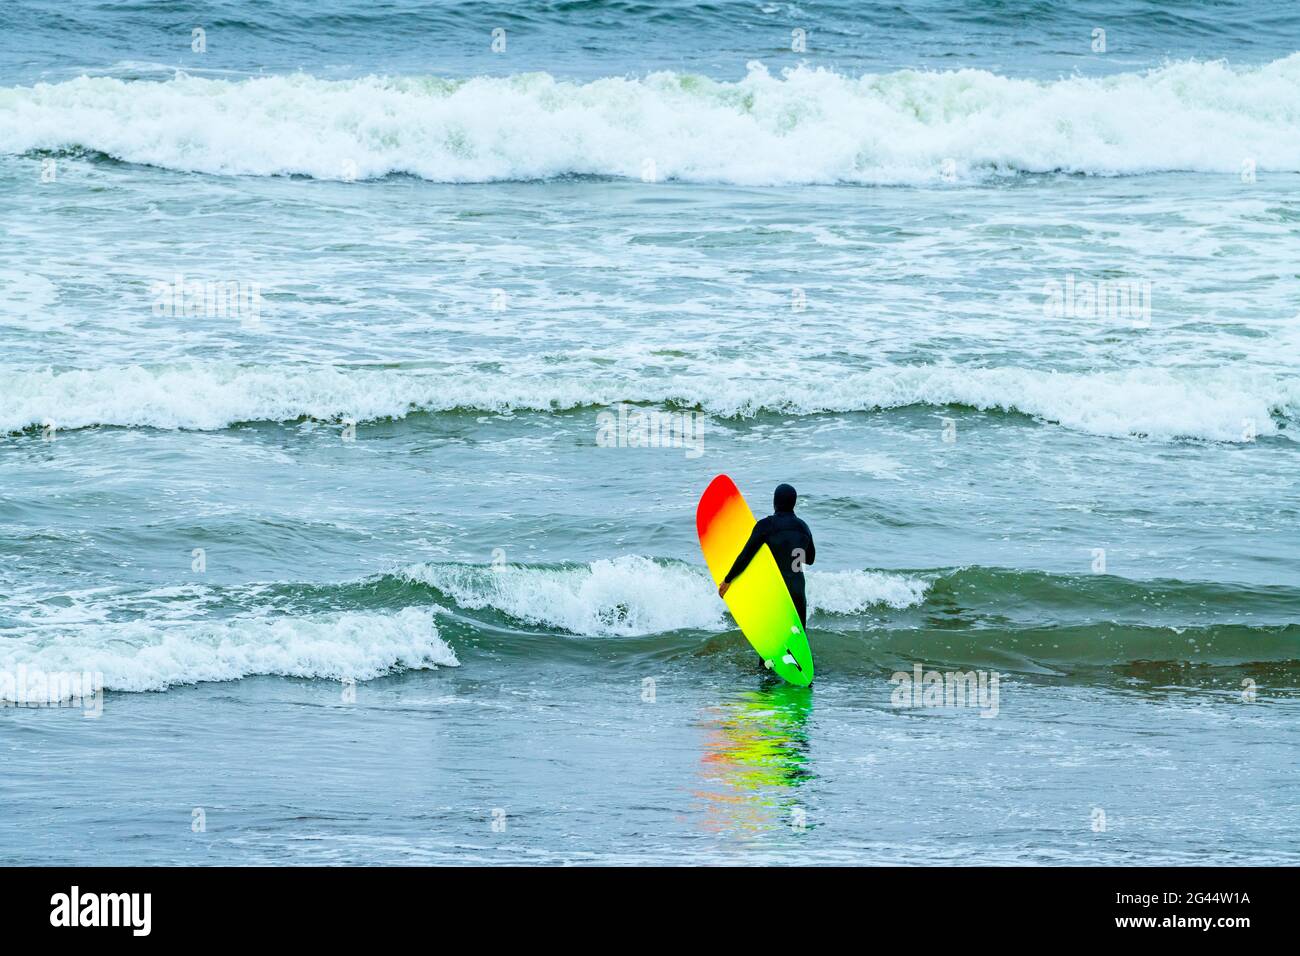 Surfer with colorful surfboard in Pacific Ocean, California, USA Stock Photo